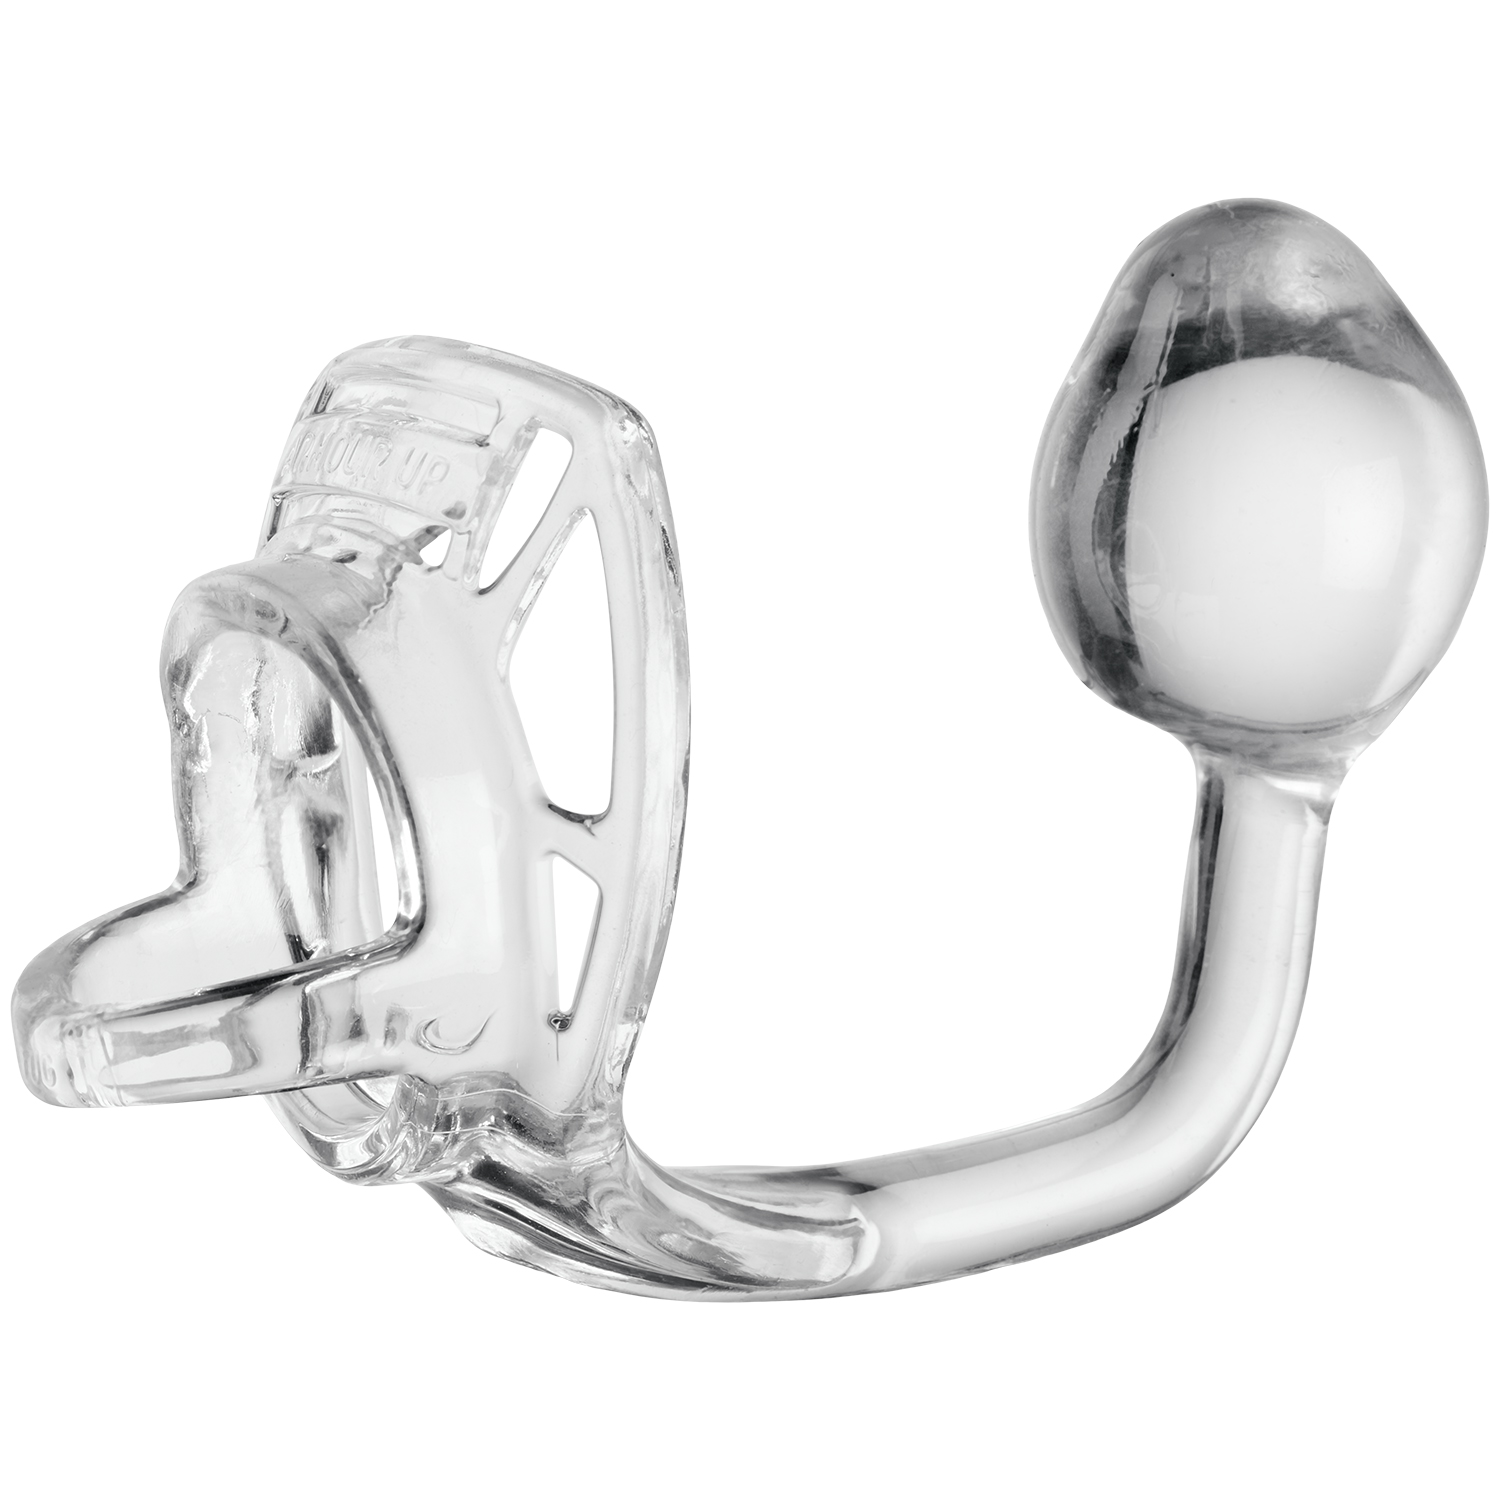 Perfect Fit Armour Tug Lock Butt Plug og Penis Ring-Clear thumbnail